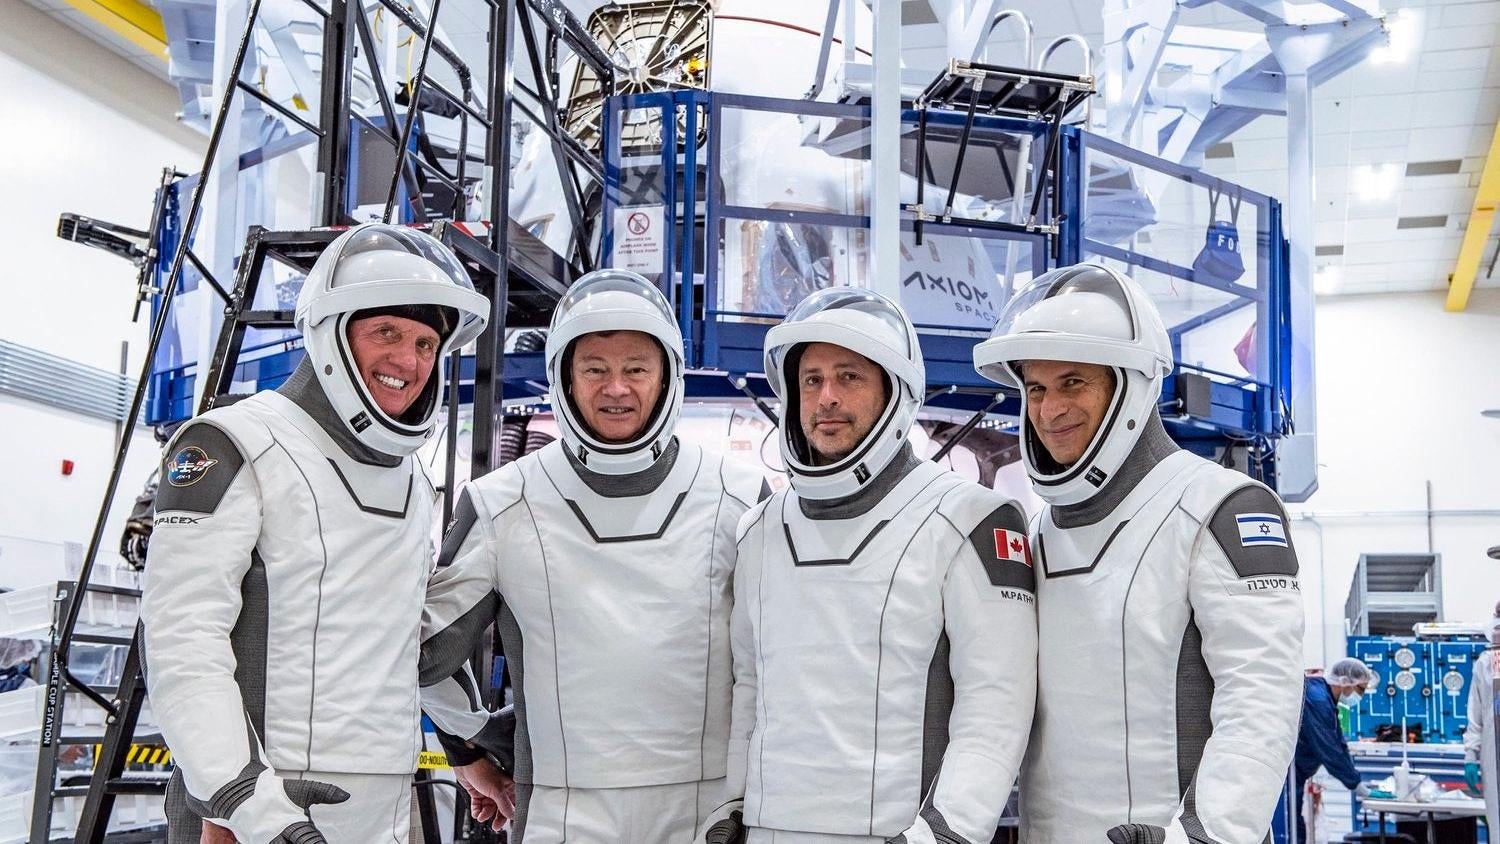 The Ax-1 crew (from left to right): Larry Connor, Michael López-Alegría, Mark Pathy, and Eytan Stibbe. (Photo: Axiom Space)